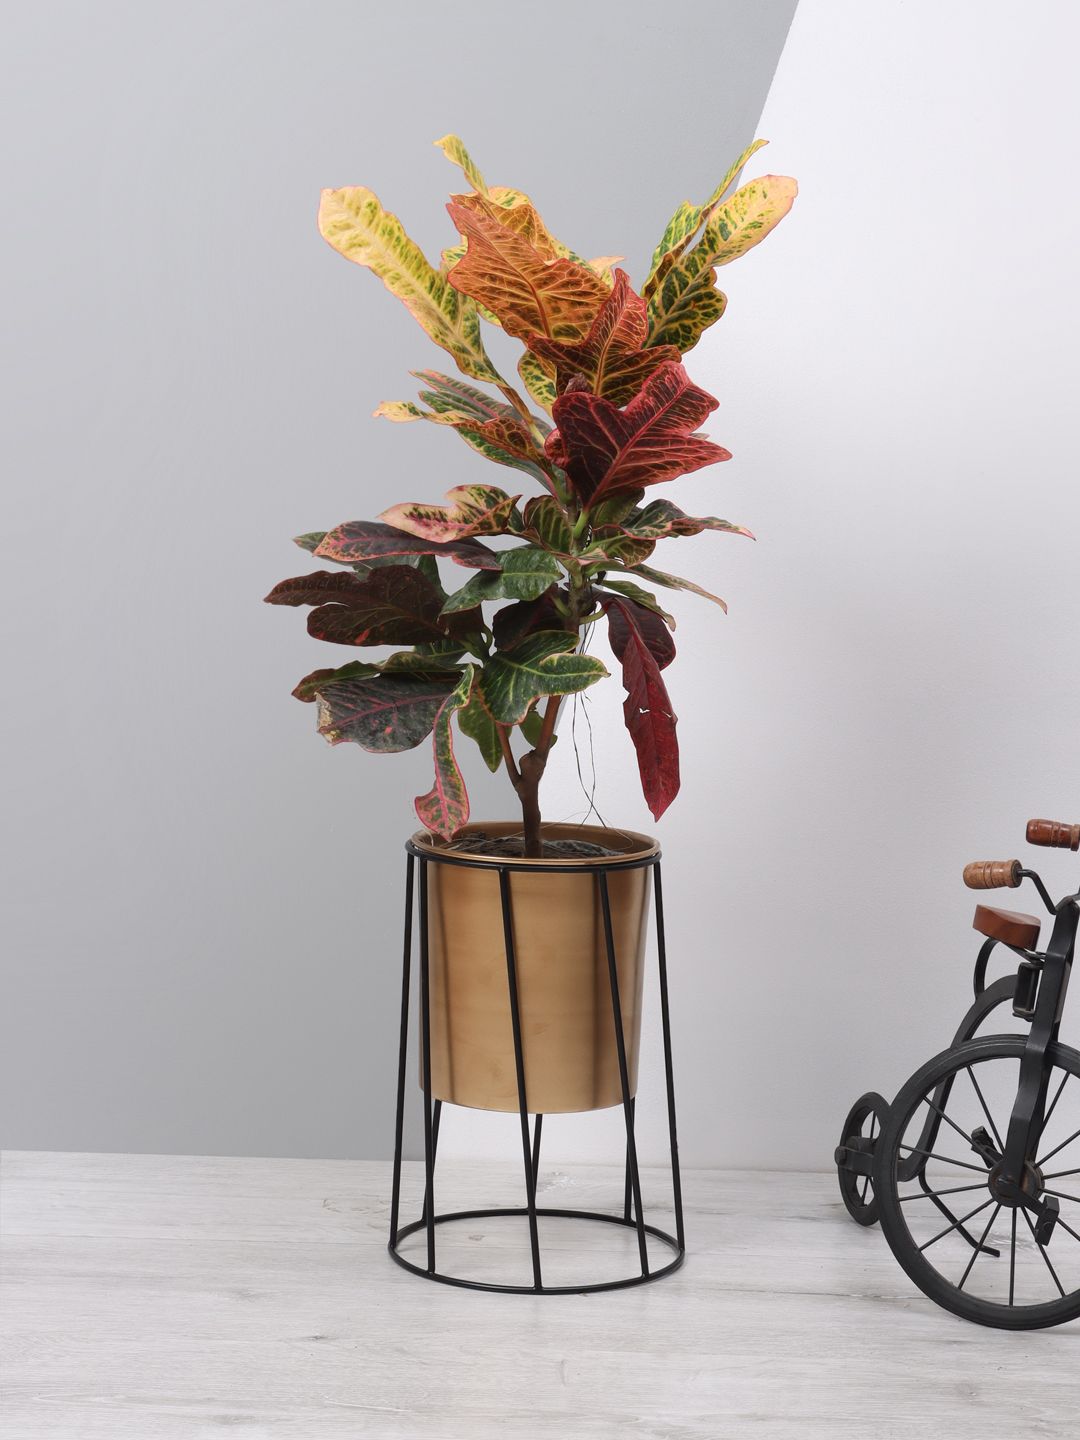 Aapno Rajasthan Copper-Toned & Black Cylindrical Metal Planter With Stand Price in India